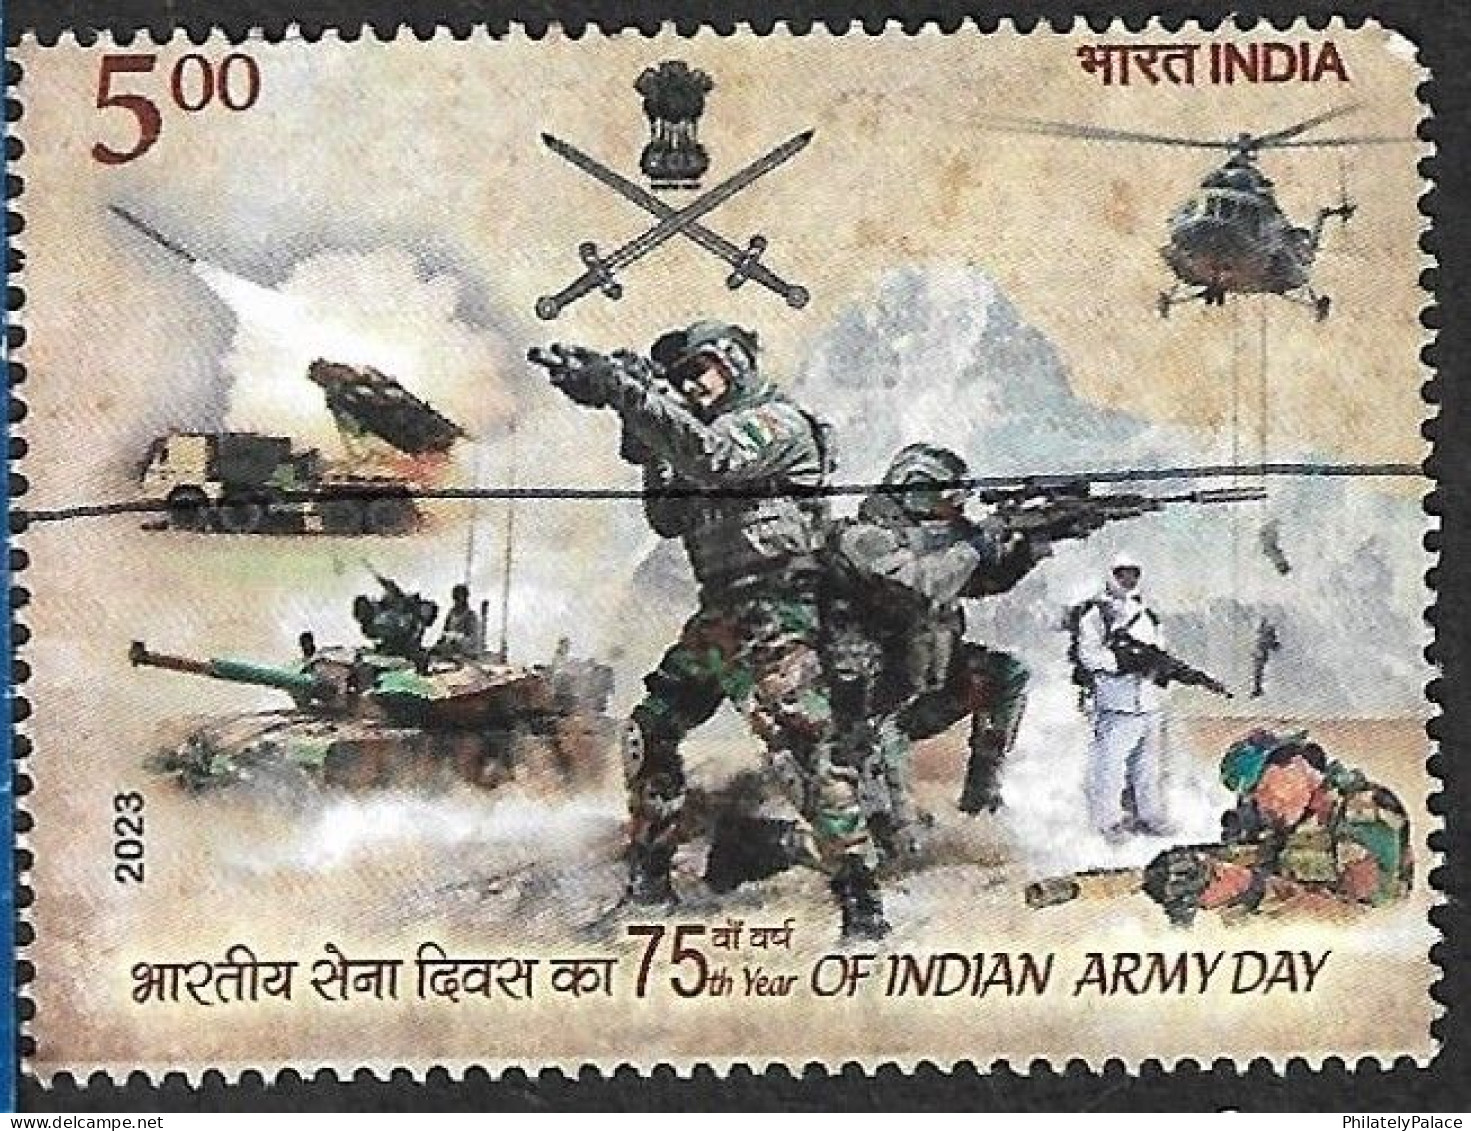 India 2023 Army,Helicopter,Arjun Tank MK III,Gun,Sword,Sniper,Paratroopers,Rocket, War Used PEN Cancelled, Inde Indien - Usati